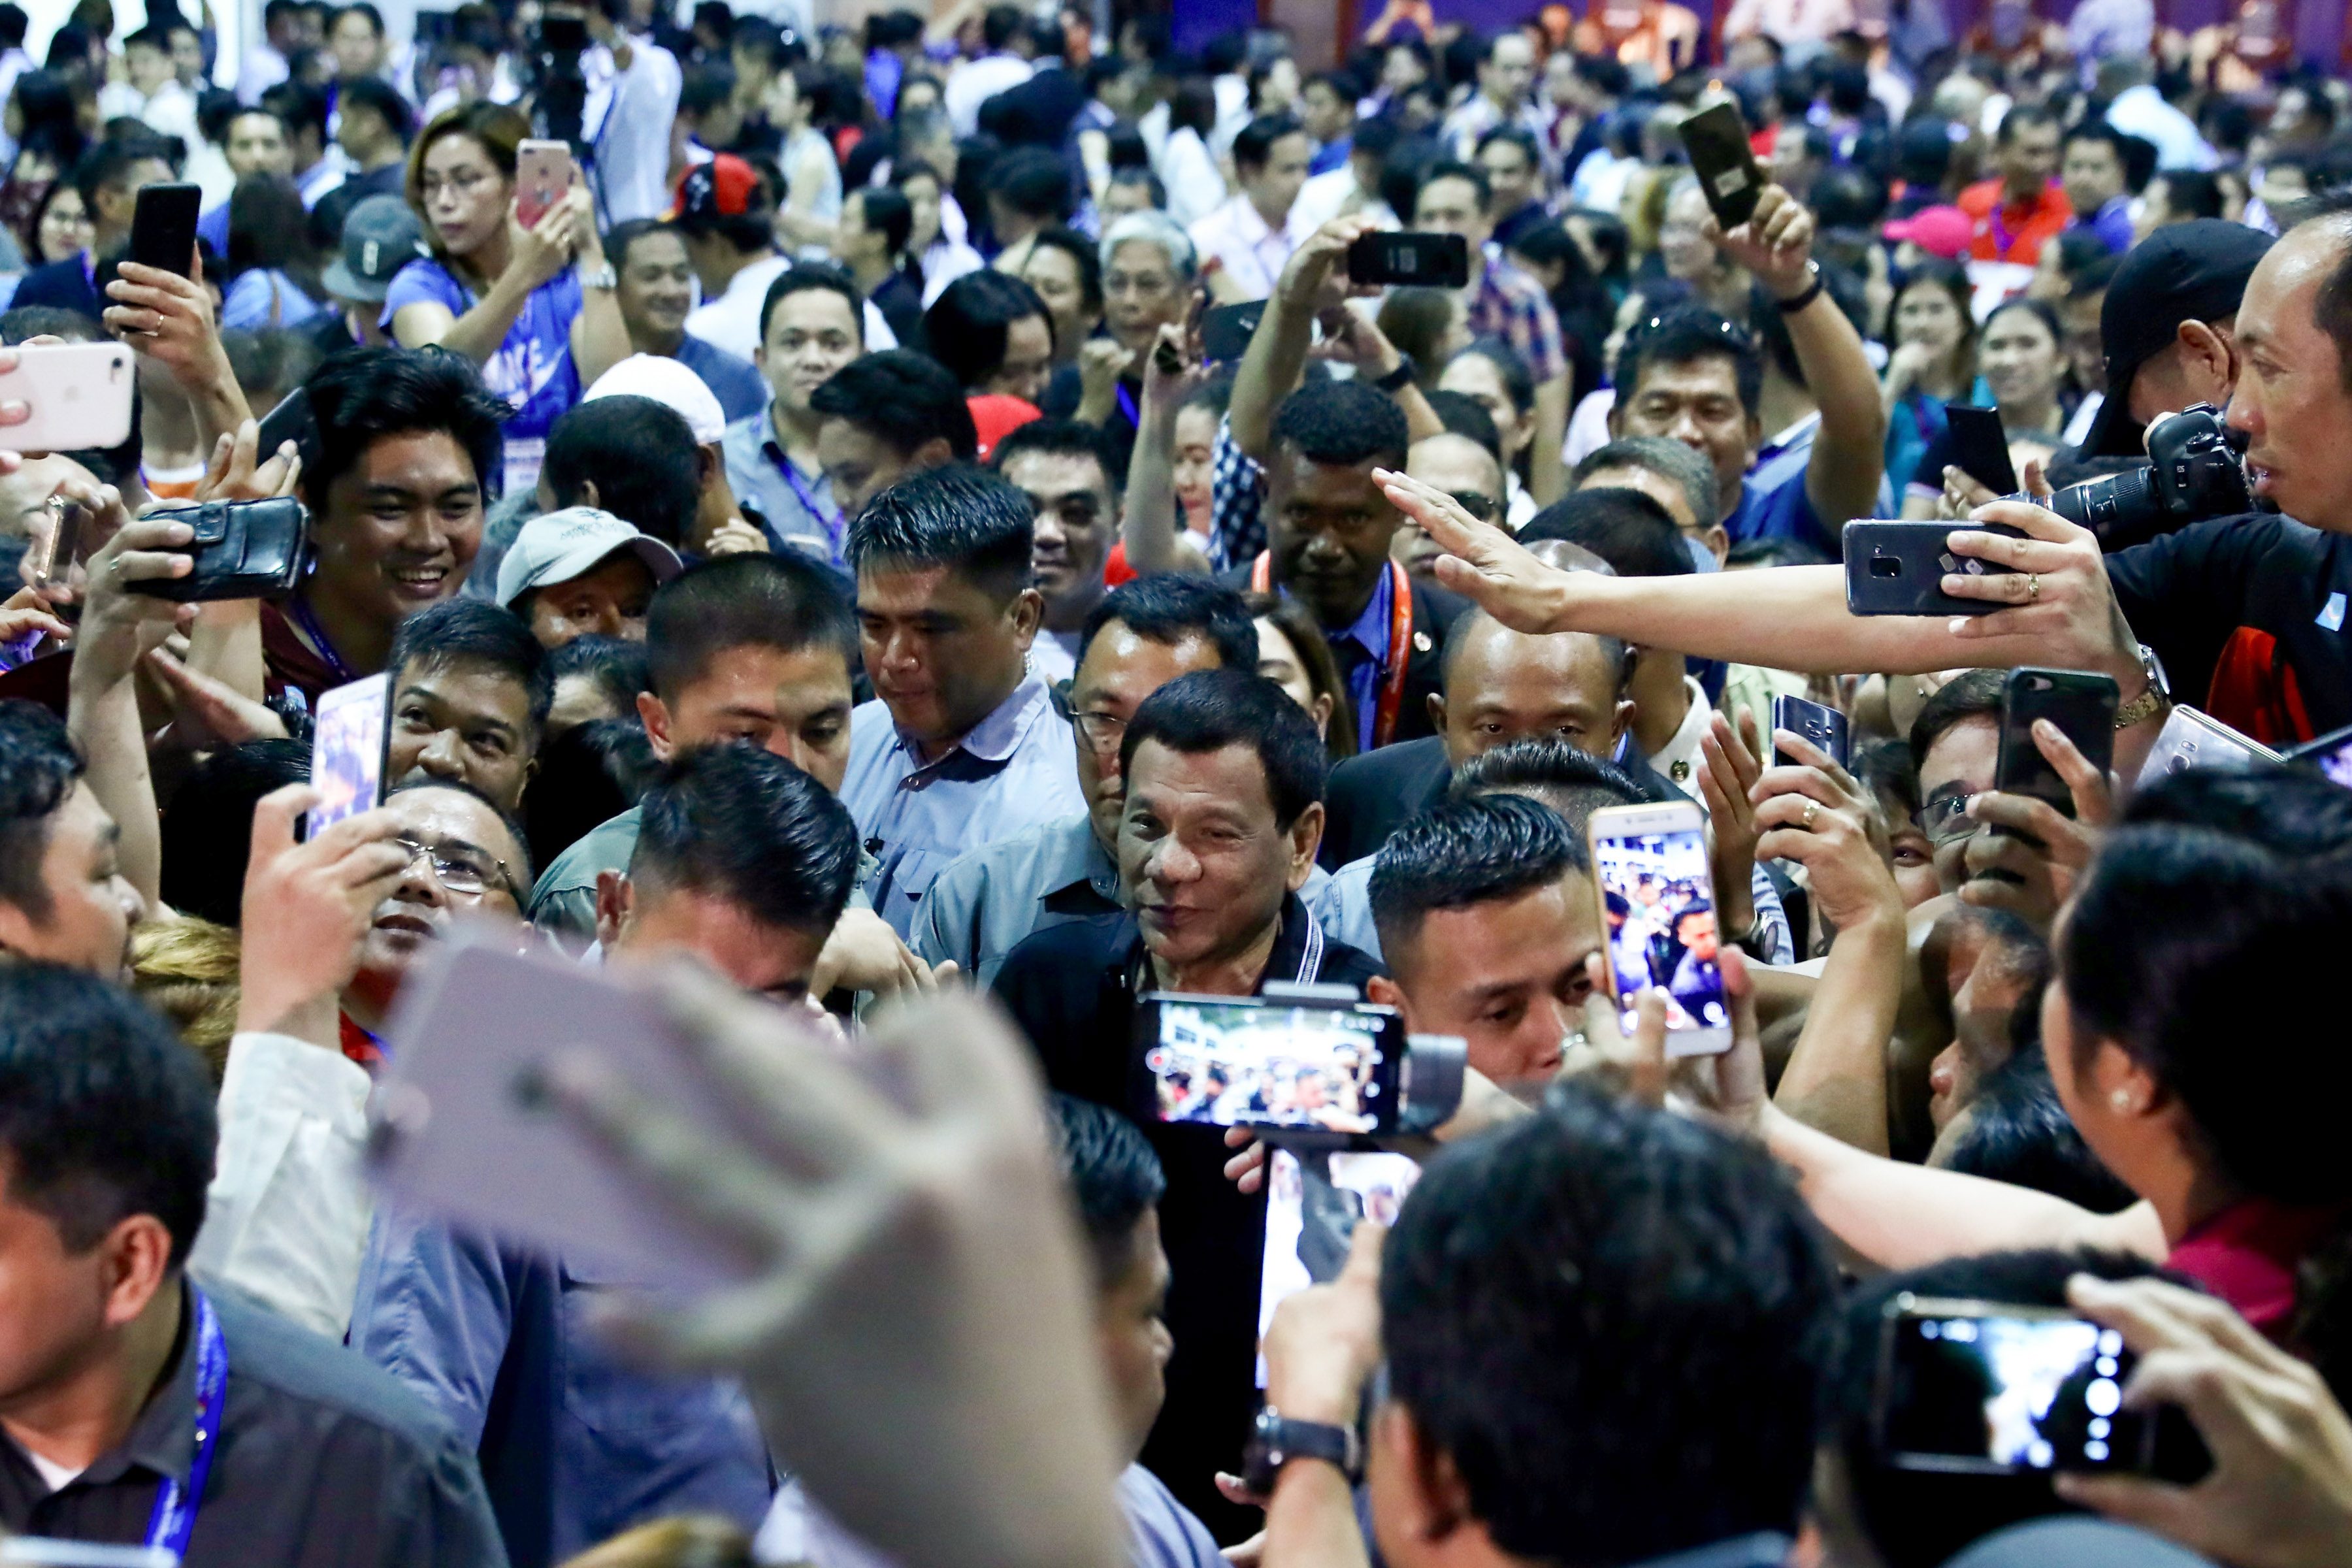 ROCKSTAR. Supporters approach President Rodrigo Duterte after his meeting with the Filipino community in Port Moresby, Papua New Guinea on November 16, 2018. Malacañang photo    